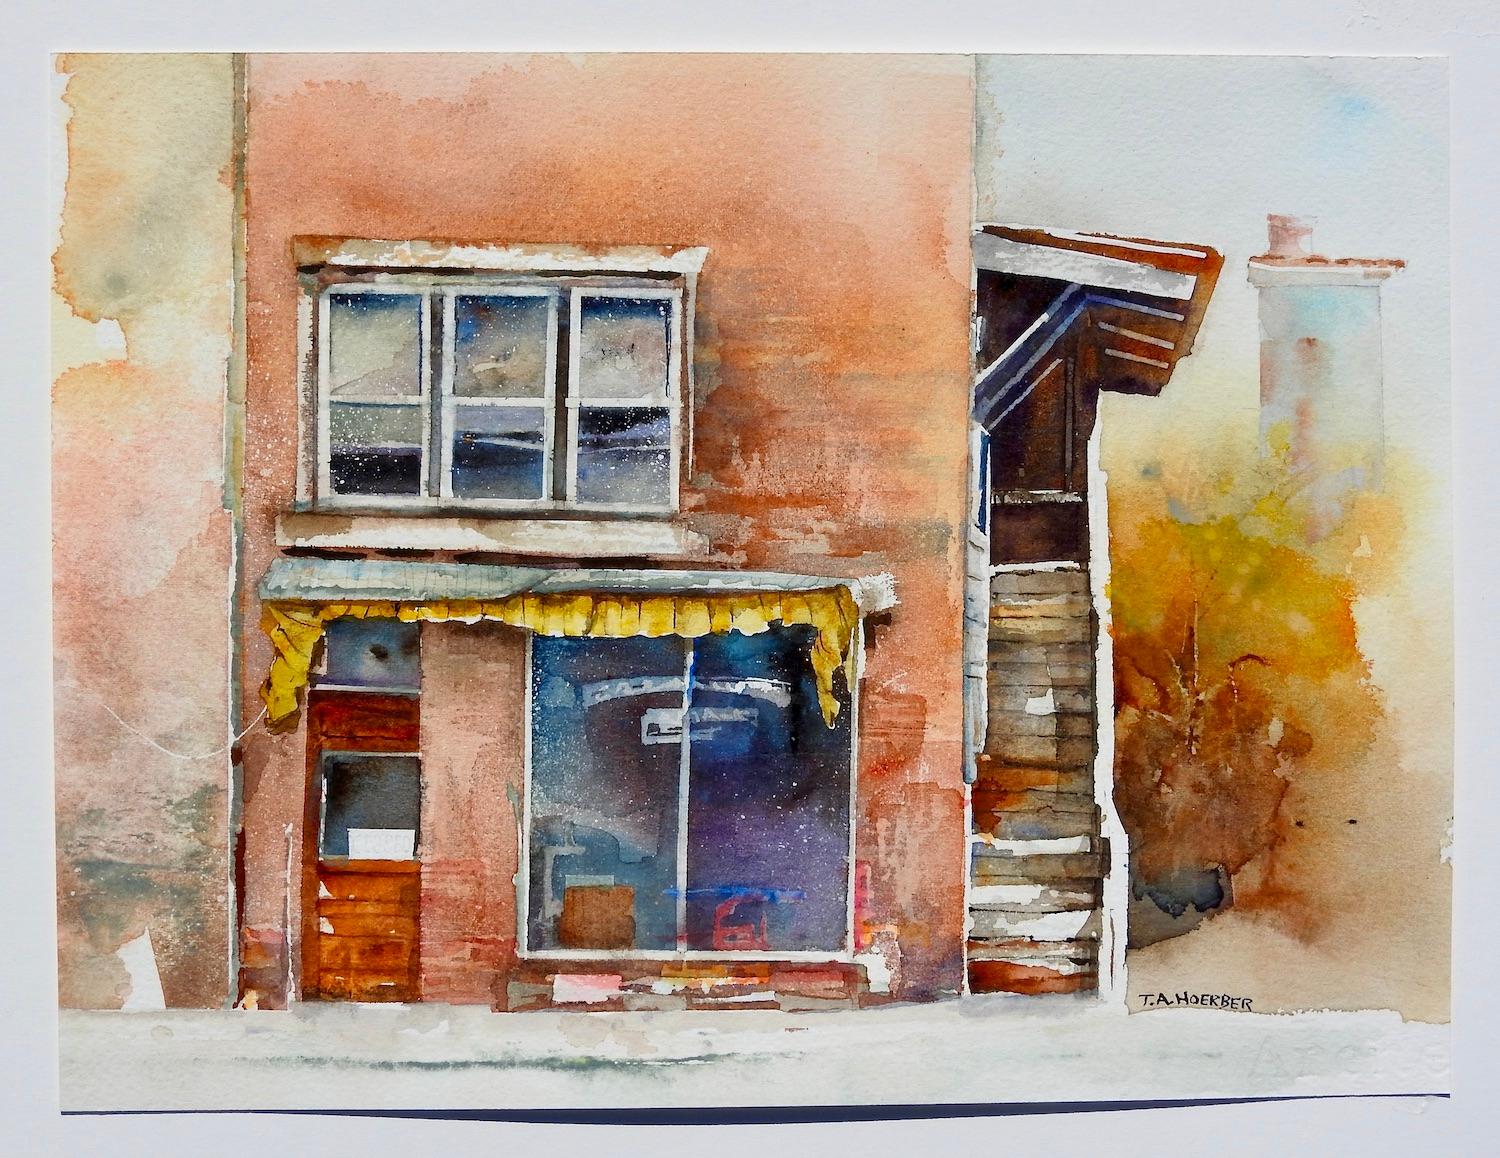 <p>Artist Comments<br>While visiting a friend in Brandon, Vermont, artist Thomas Hoerber spots an old, abandoned barber shop. The town brims with quaint history. One cannot help but think about the countless haircuts and shaves that have taken place